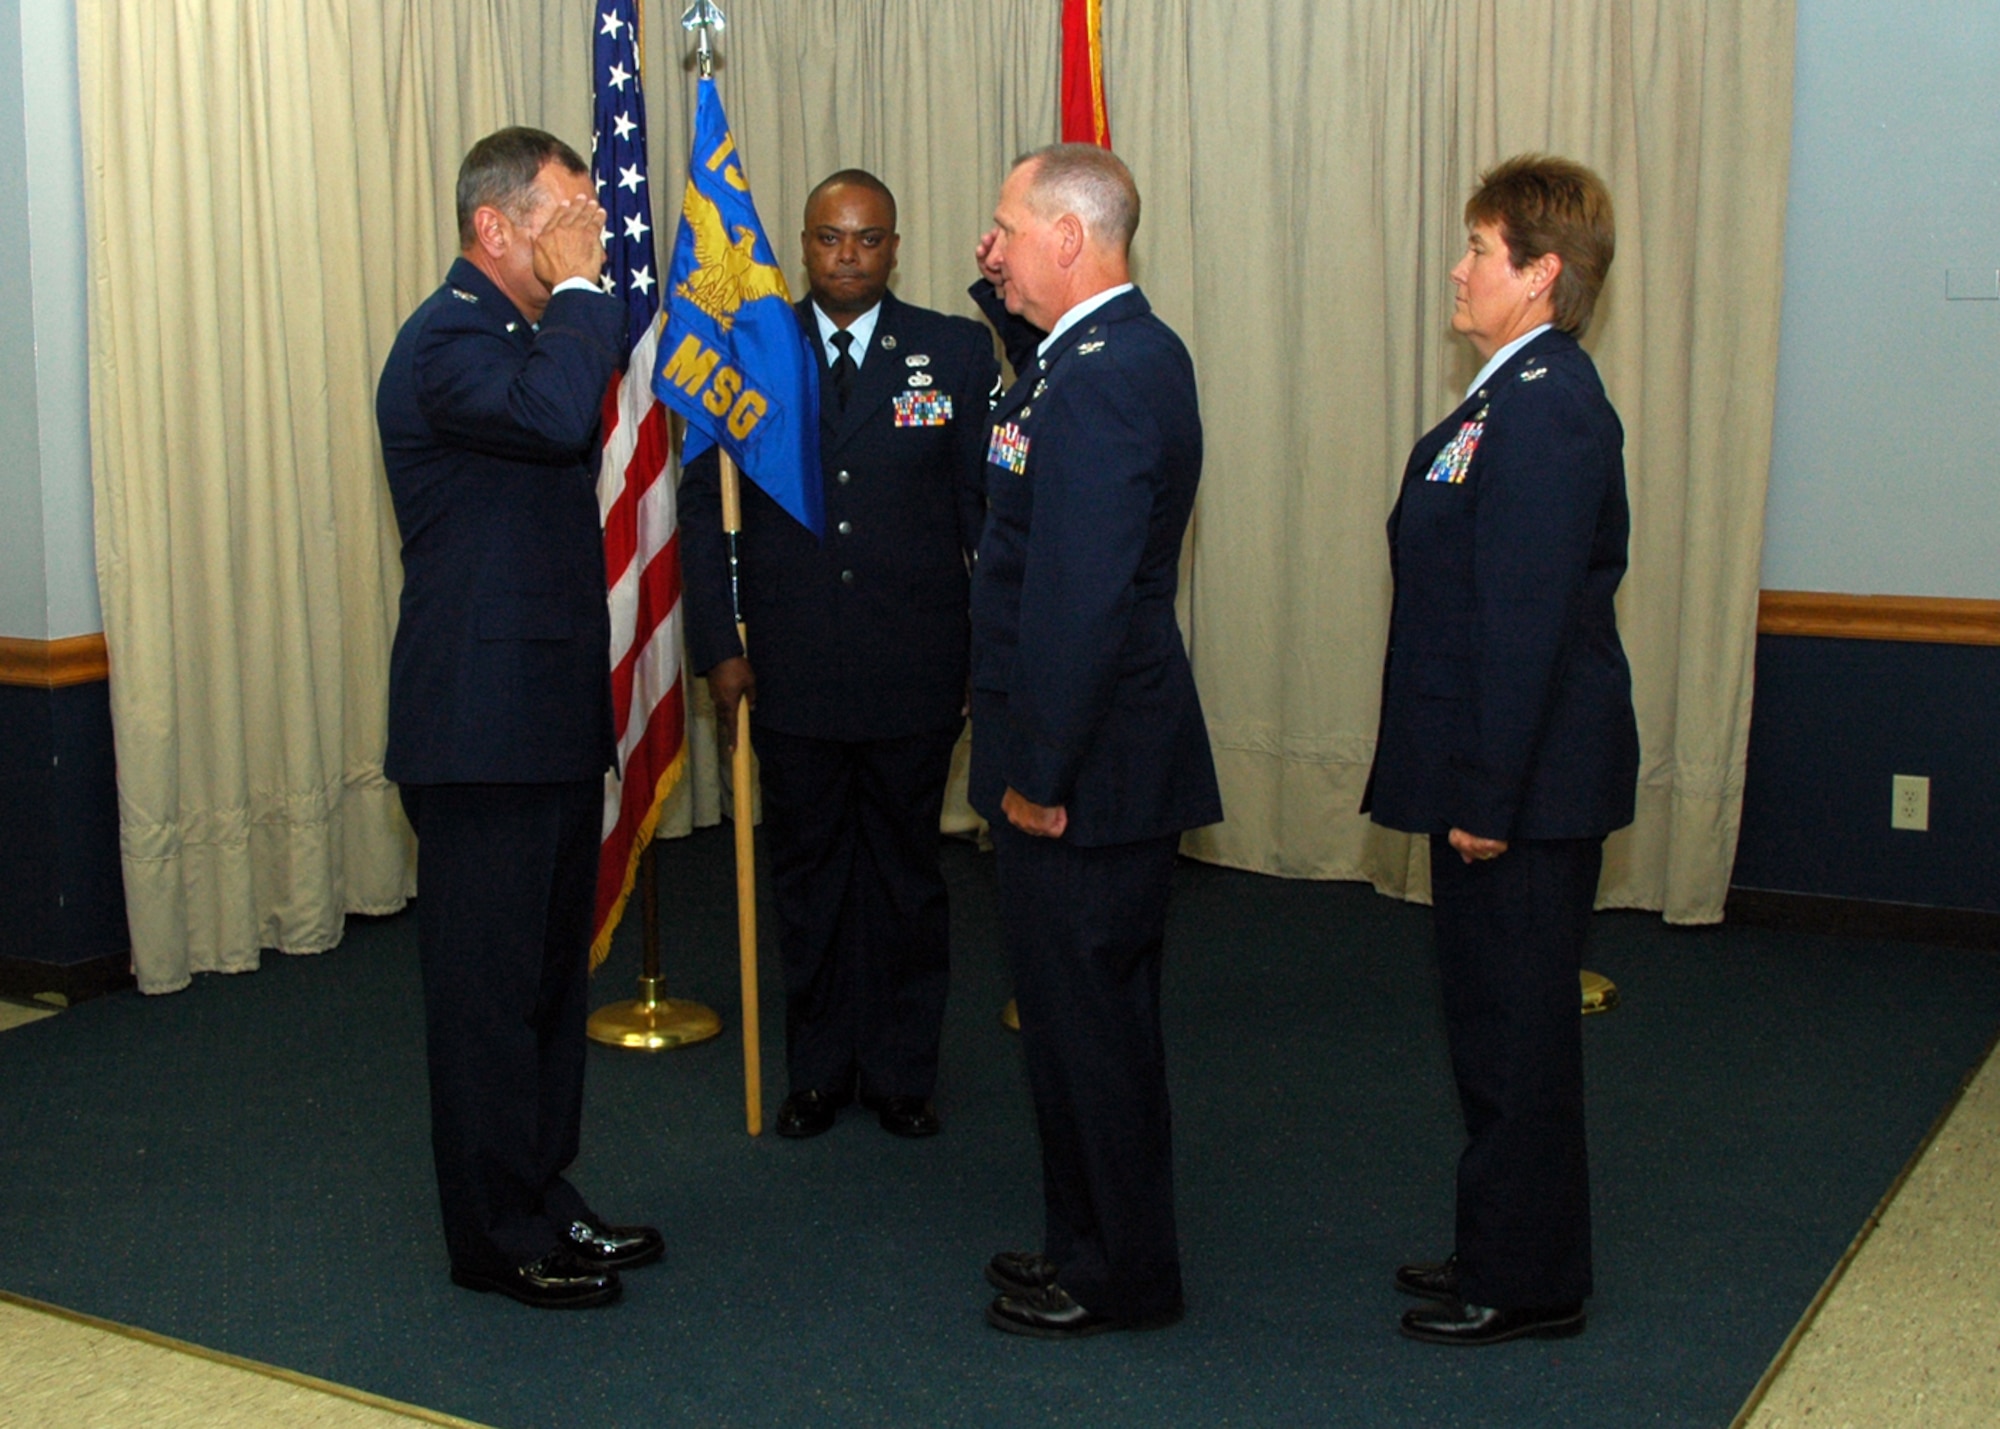 Colonel Keith Smith renders a final salute to Colonel Robert Leeker, 131 Bomb Wing Commander, during the Mission Support Group Change of Command ceremony, in which Colonel Terri Chaney (far right) assumed command, July 18.   (Photo by Master Sgt. Mary-Dale Amison)